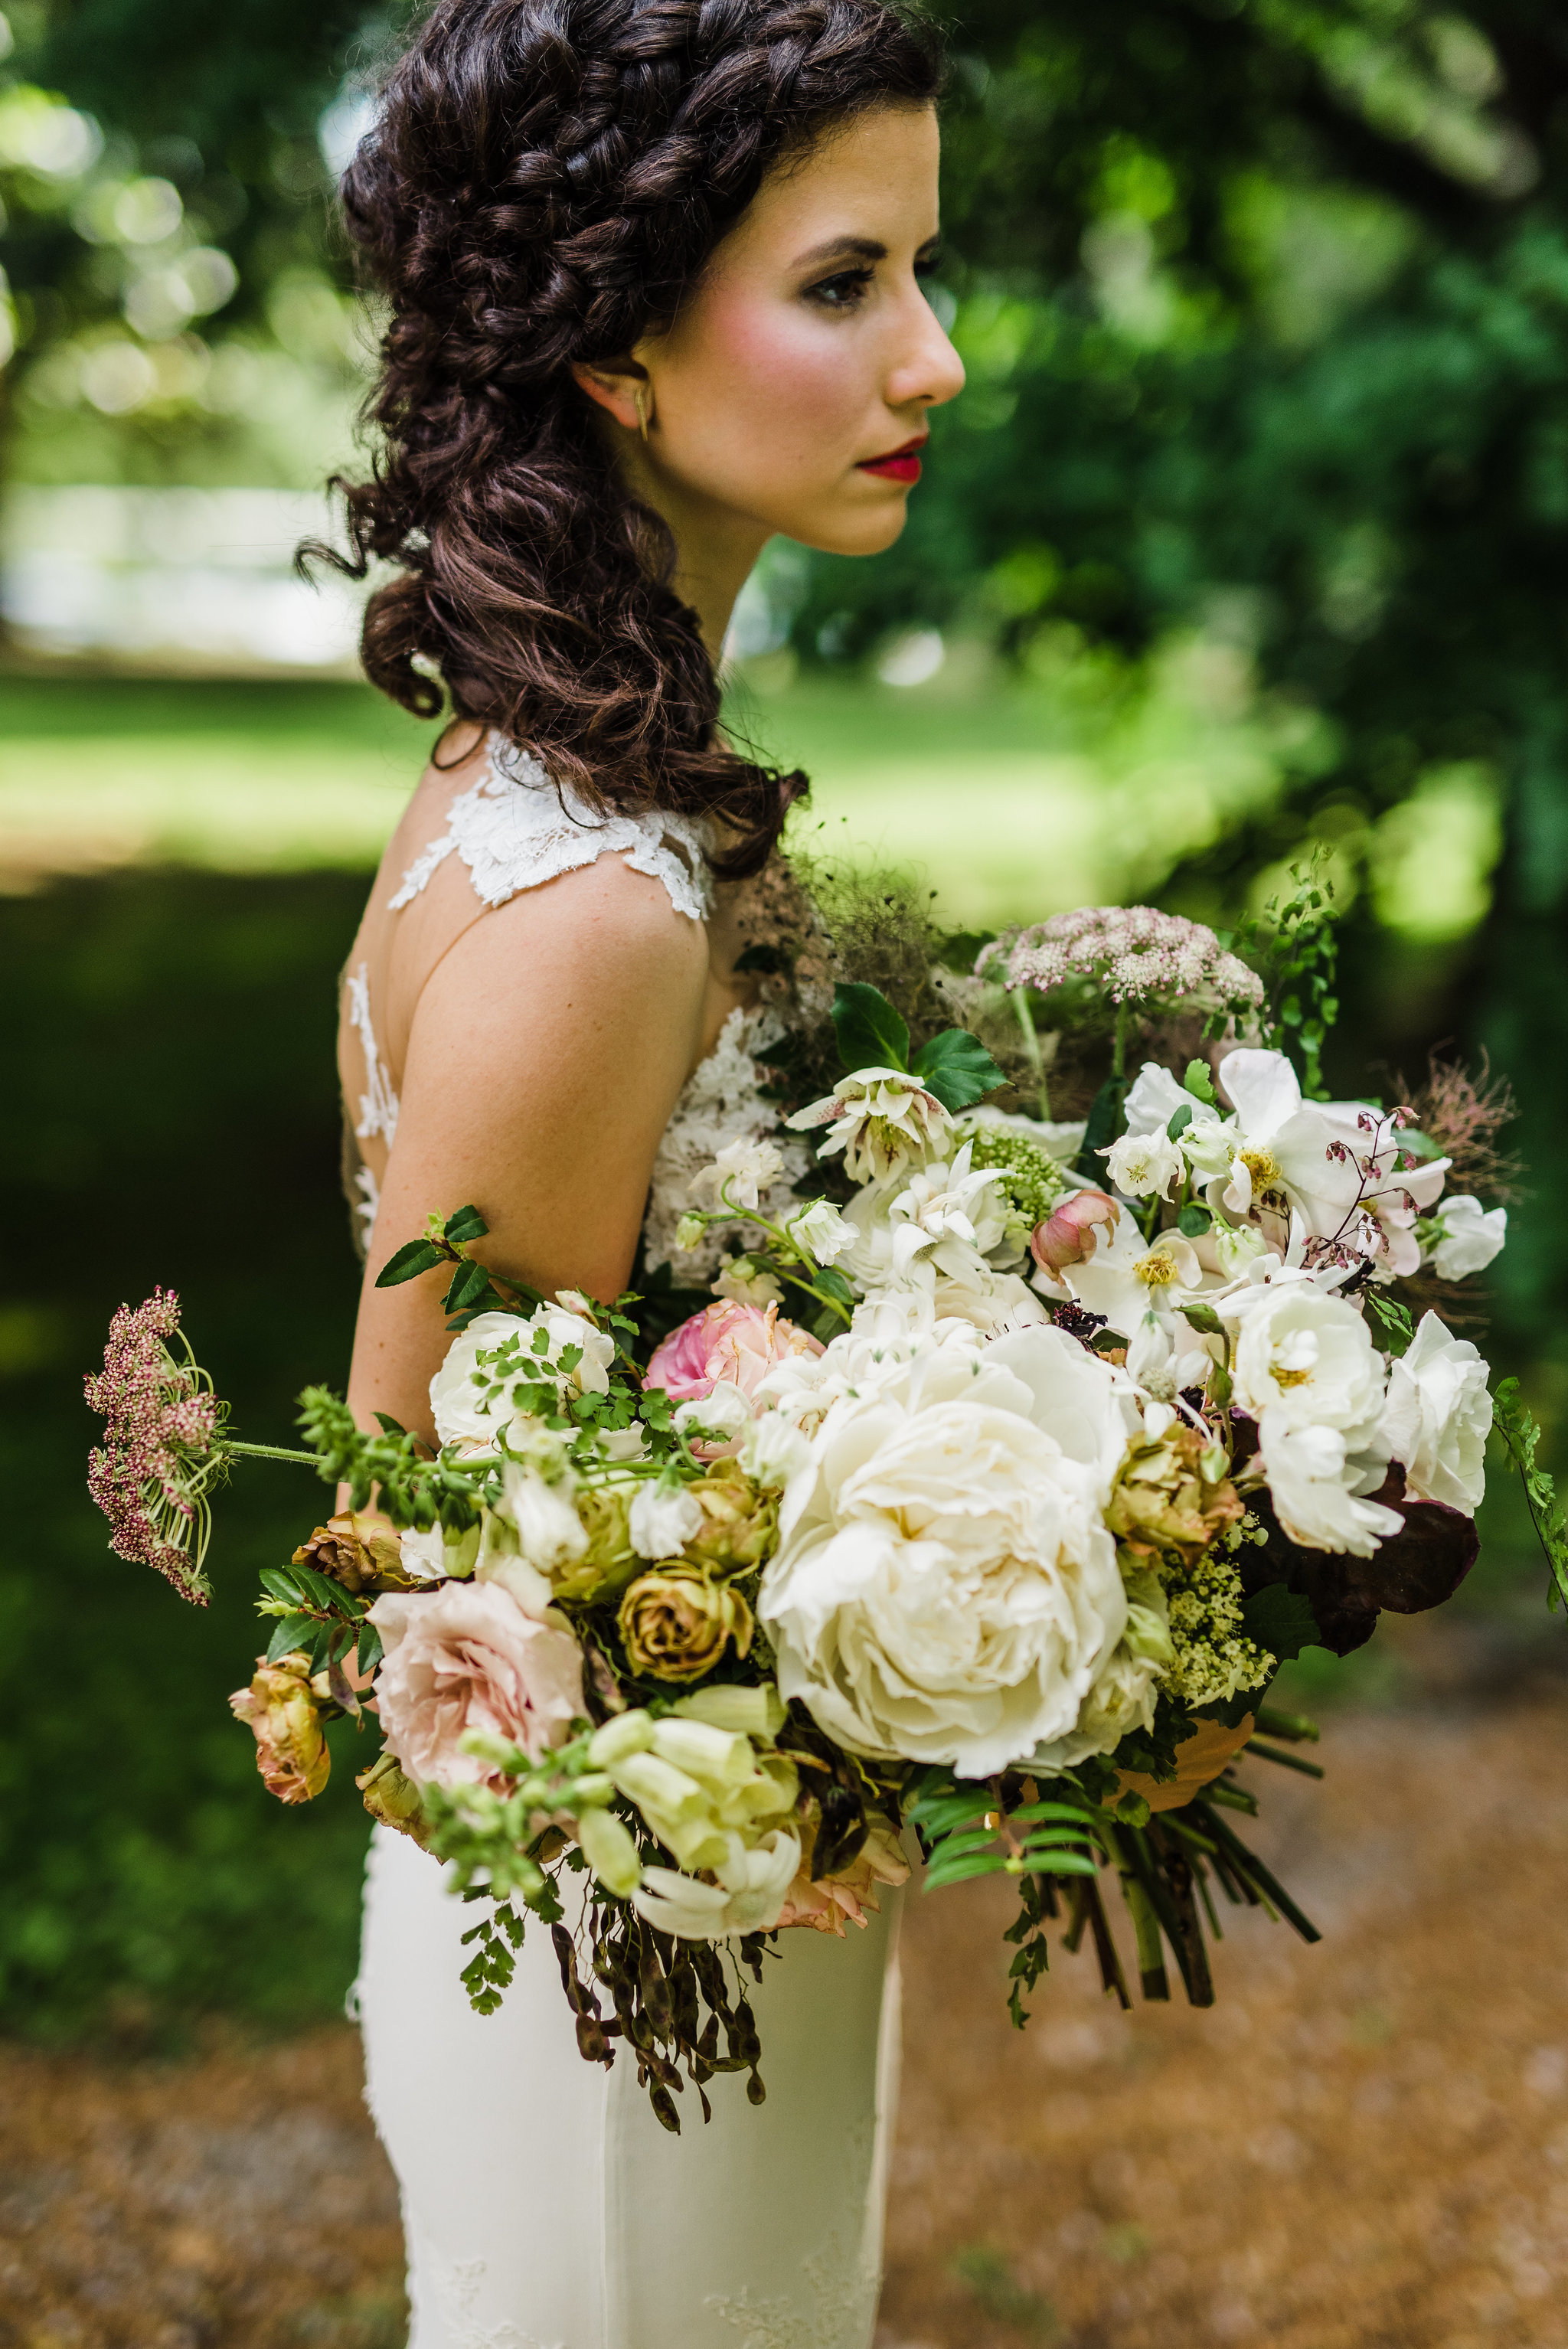 Art Deco inspired garden wedding at Travellers Rest in Nashville with lush, organic floral design